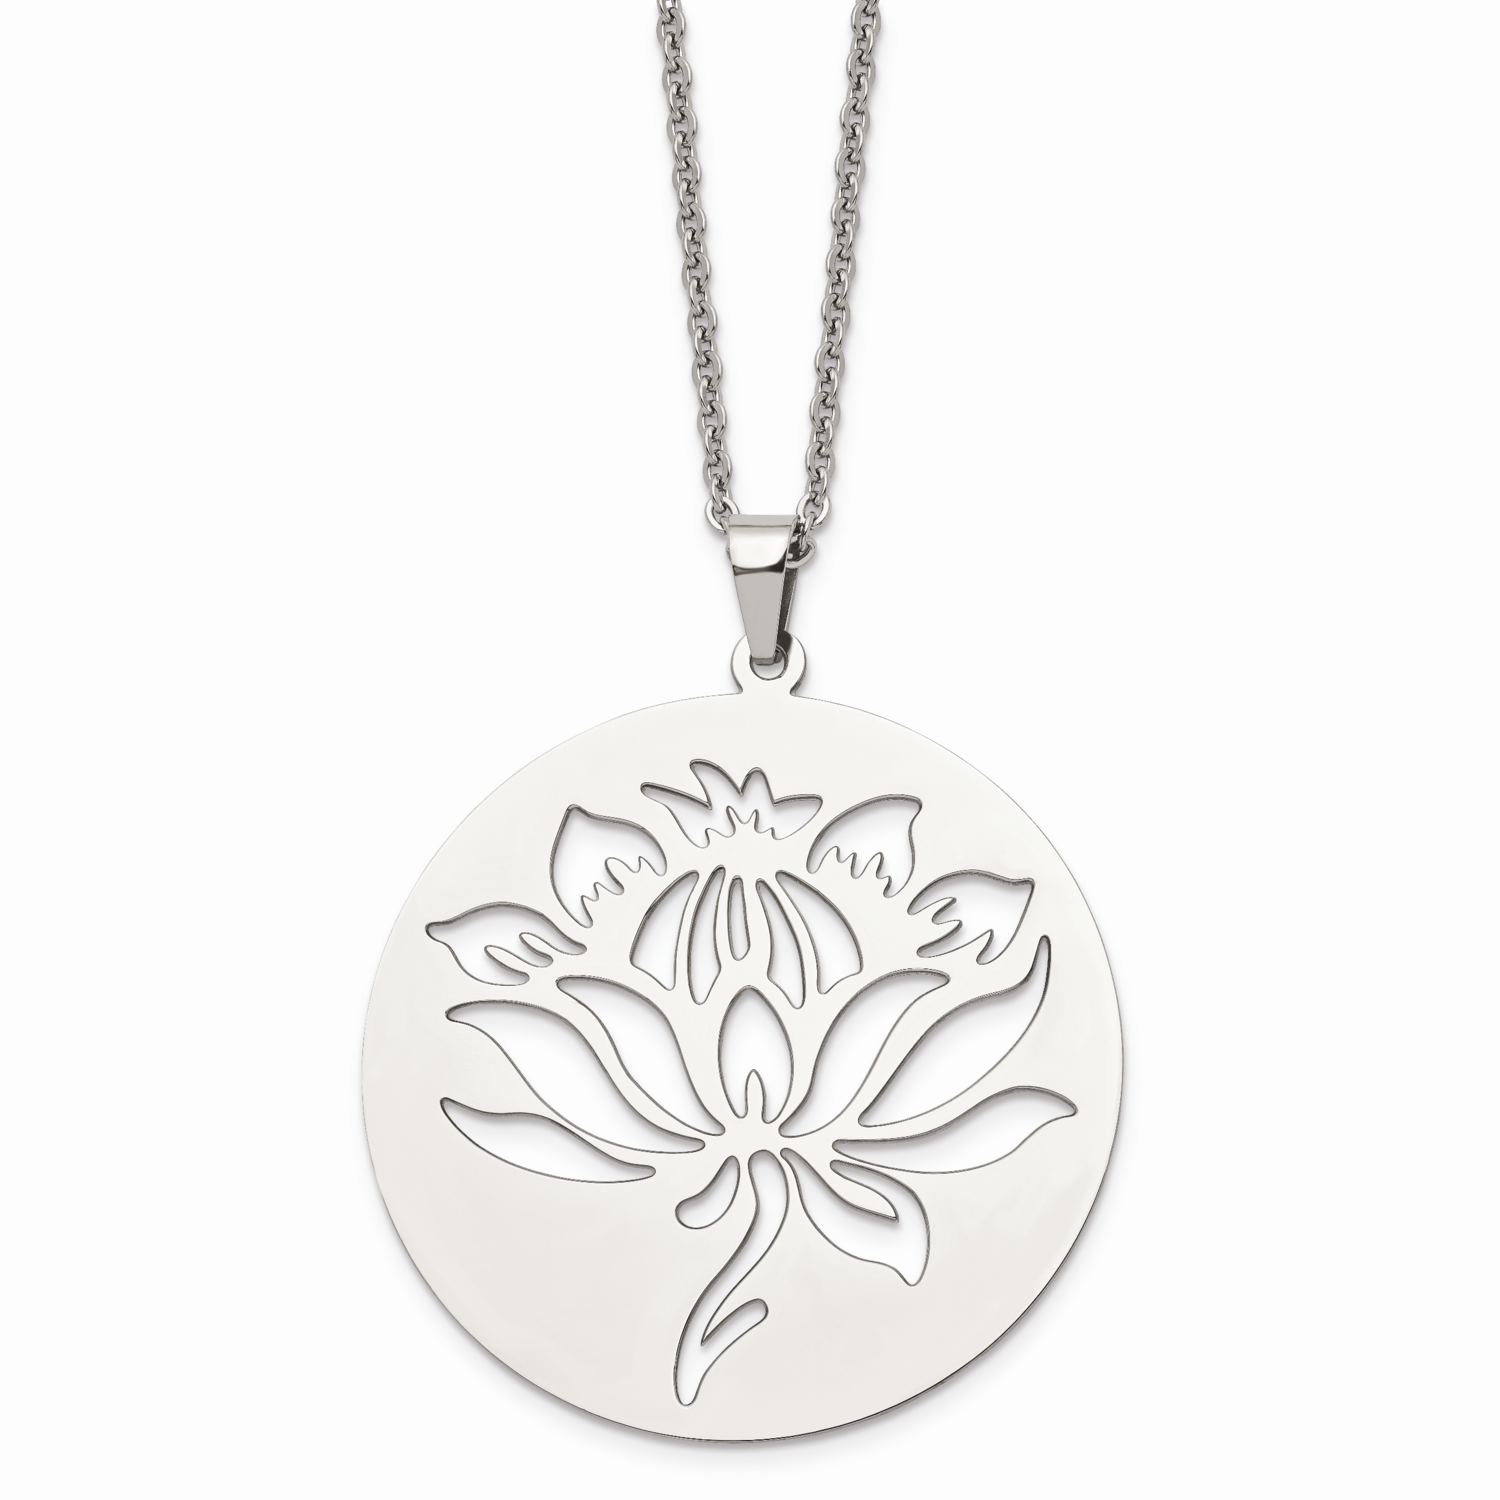 Flower Cutout Pendant Necklace Stainless Steel SRN638-22